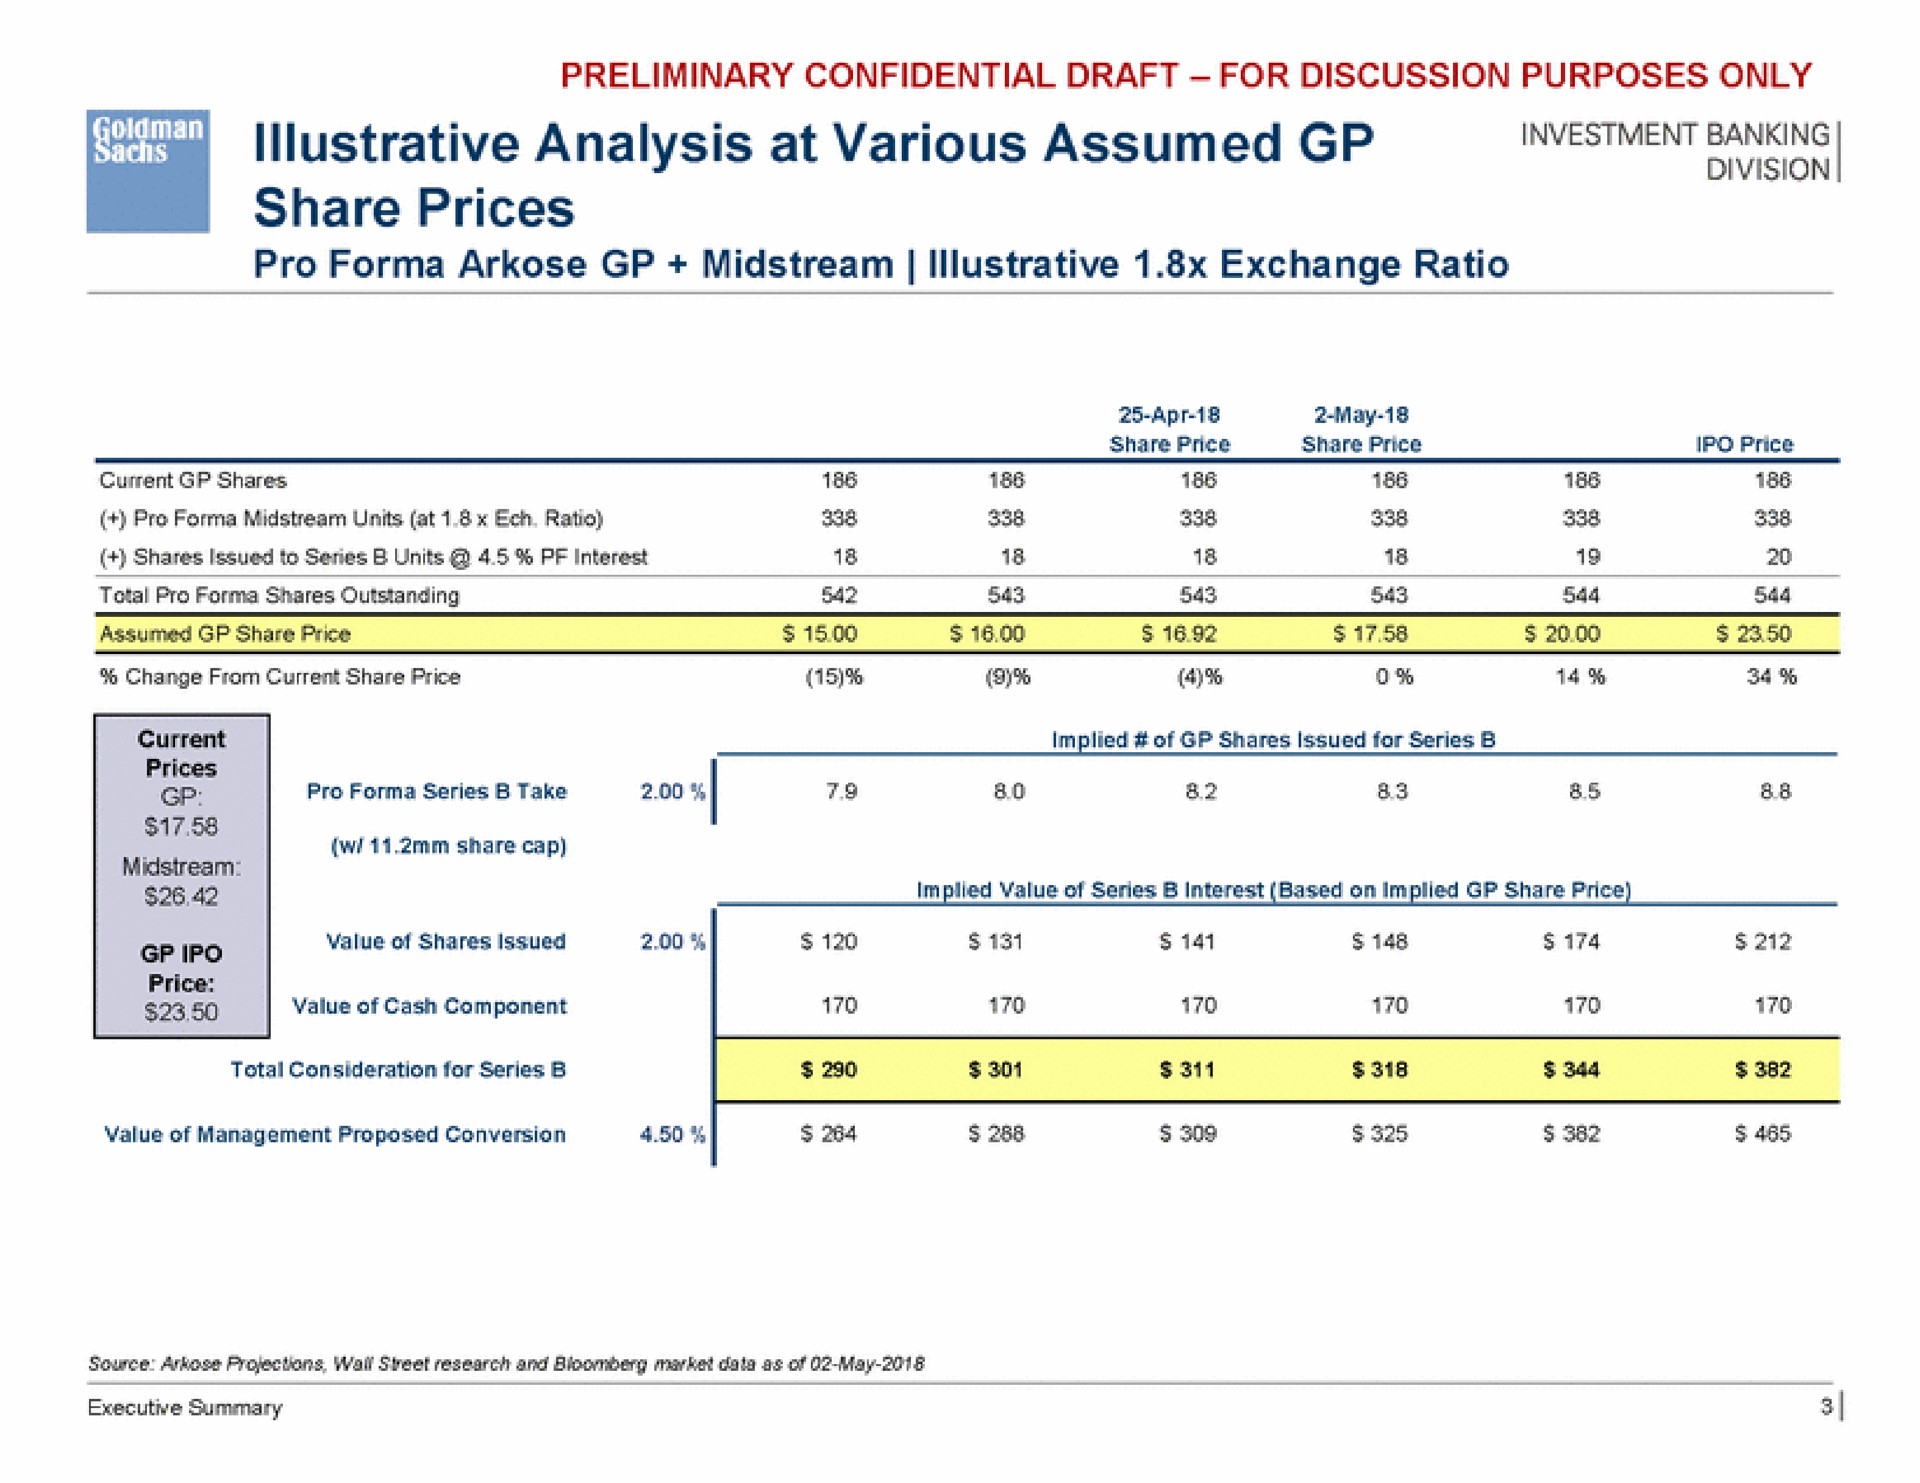 illustrative analysis at various assumed investment banking share prices | Goldman Sachs